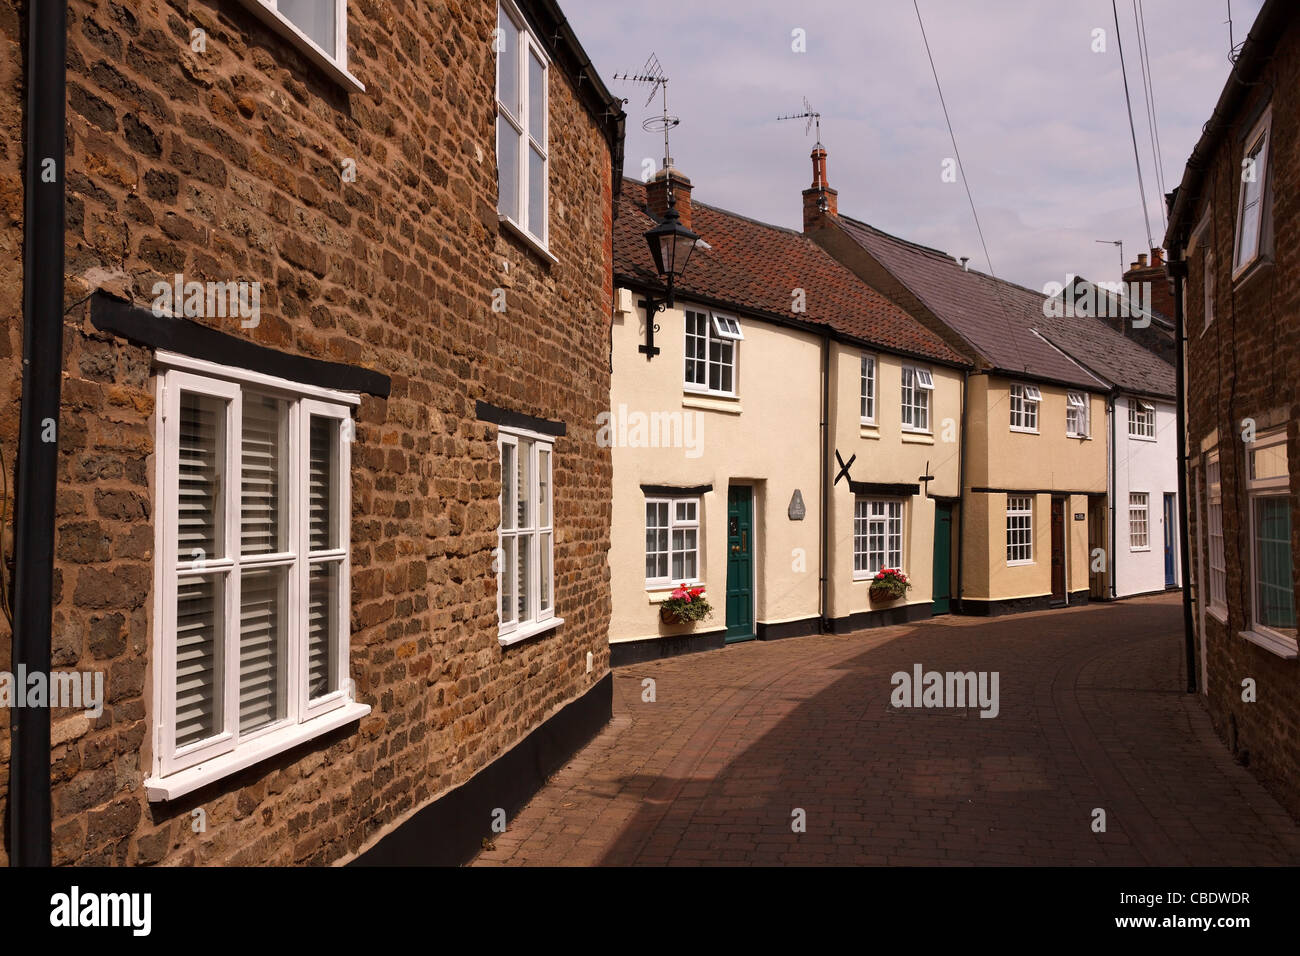 Terraced row of beautiful old painted English cottages in narrow back street, Dean's Street, Oakham, Rutland, England, UK Stock Photo